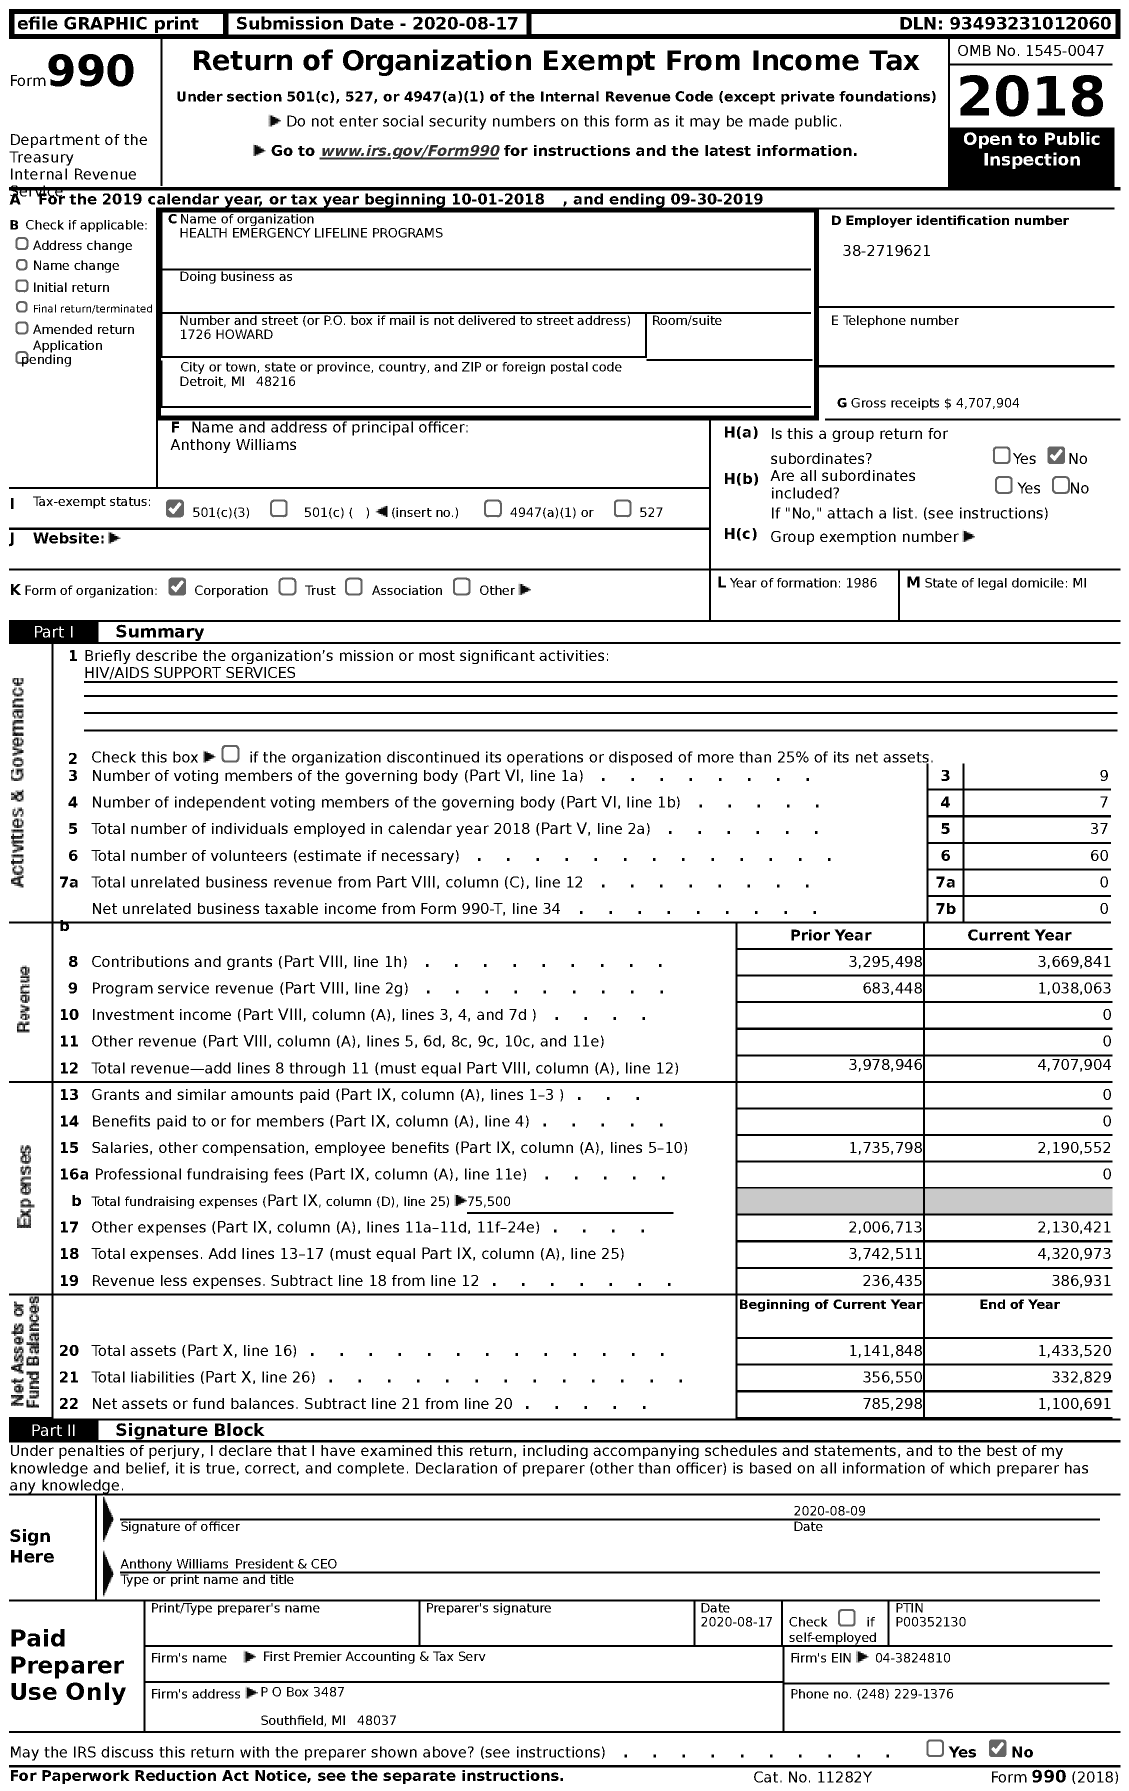 Image of first page of 2018 Form 990 for Health Emergency Lifeline Programs